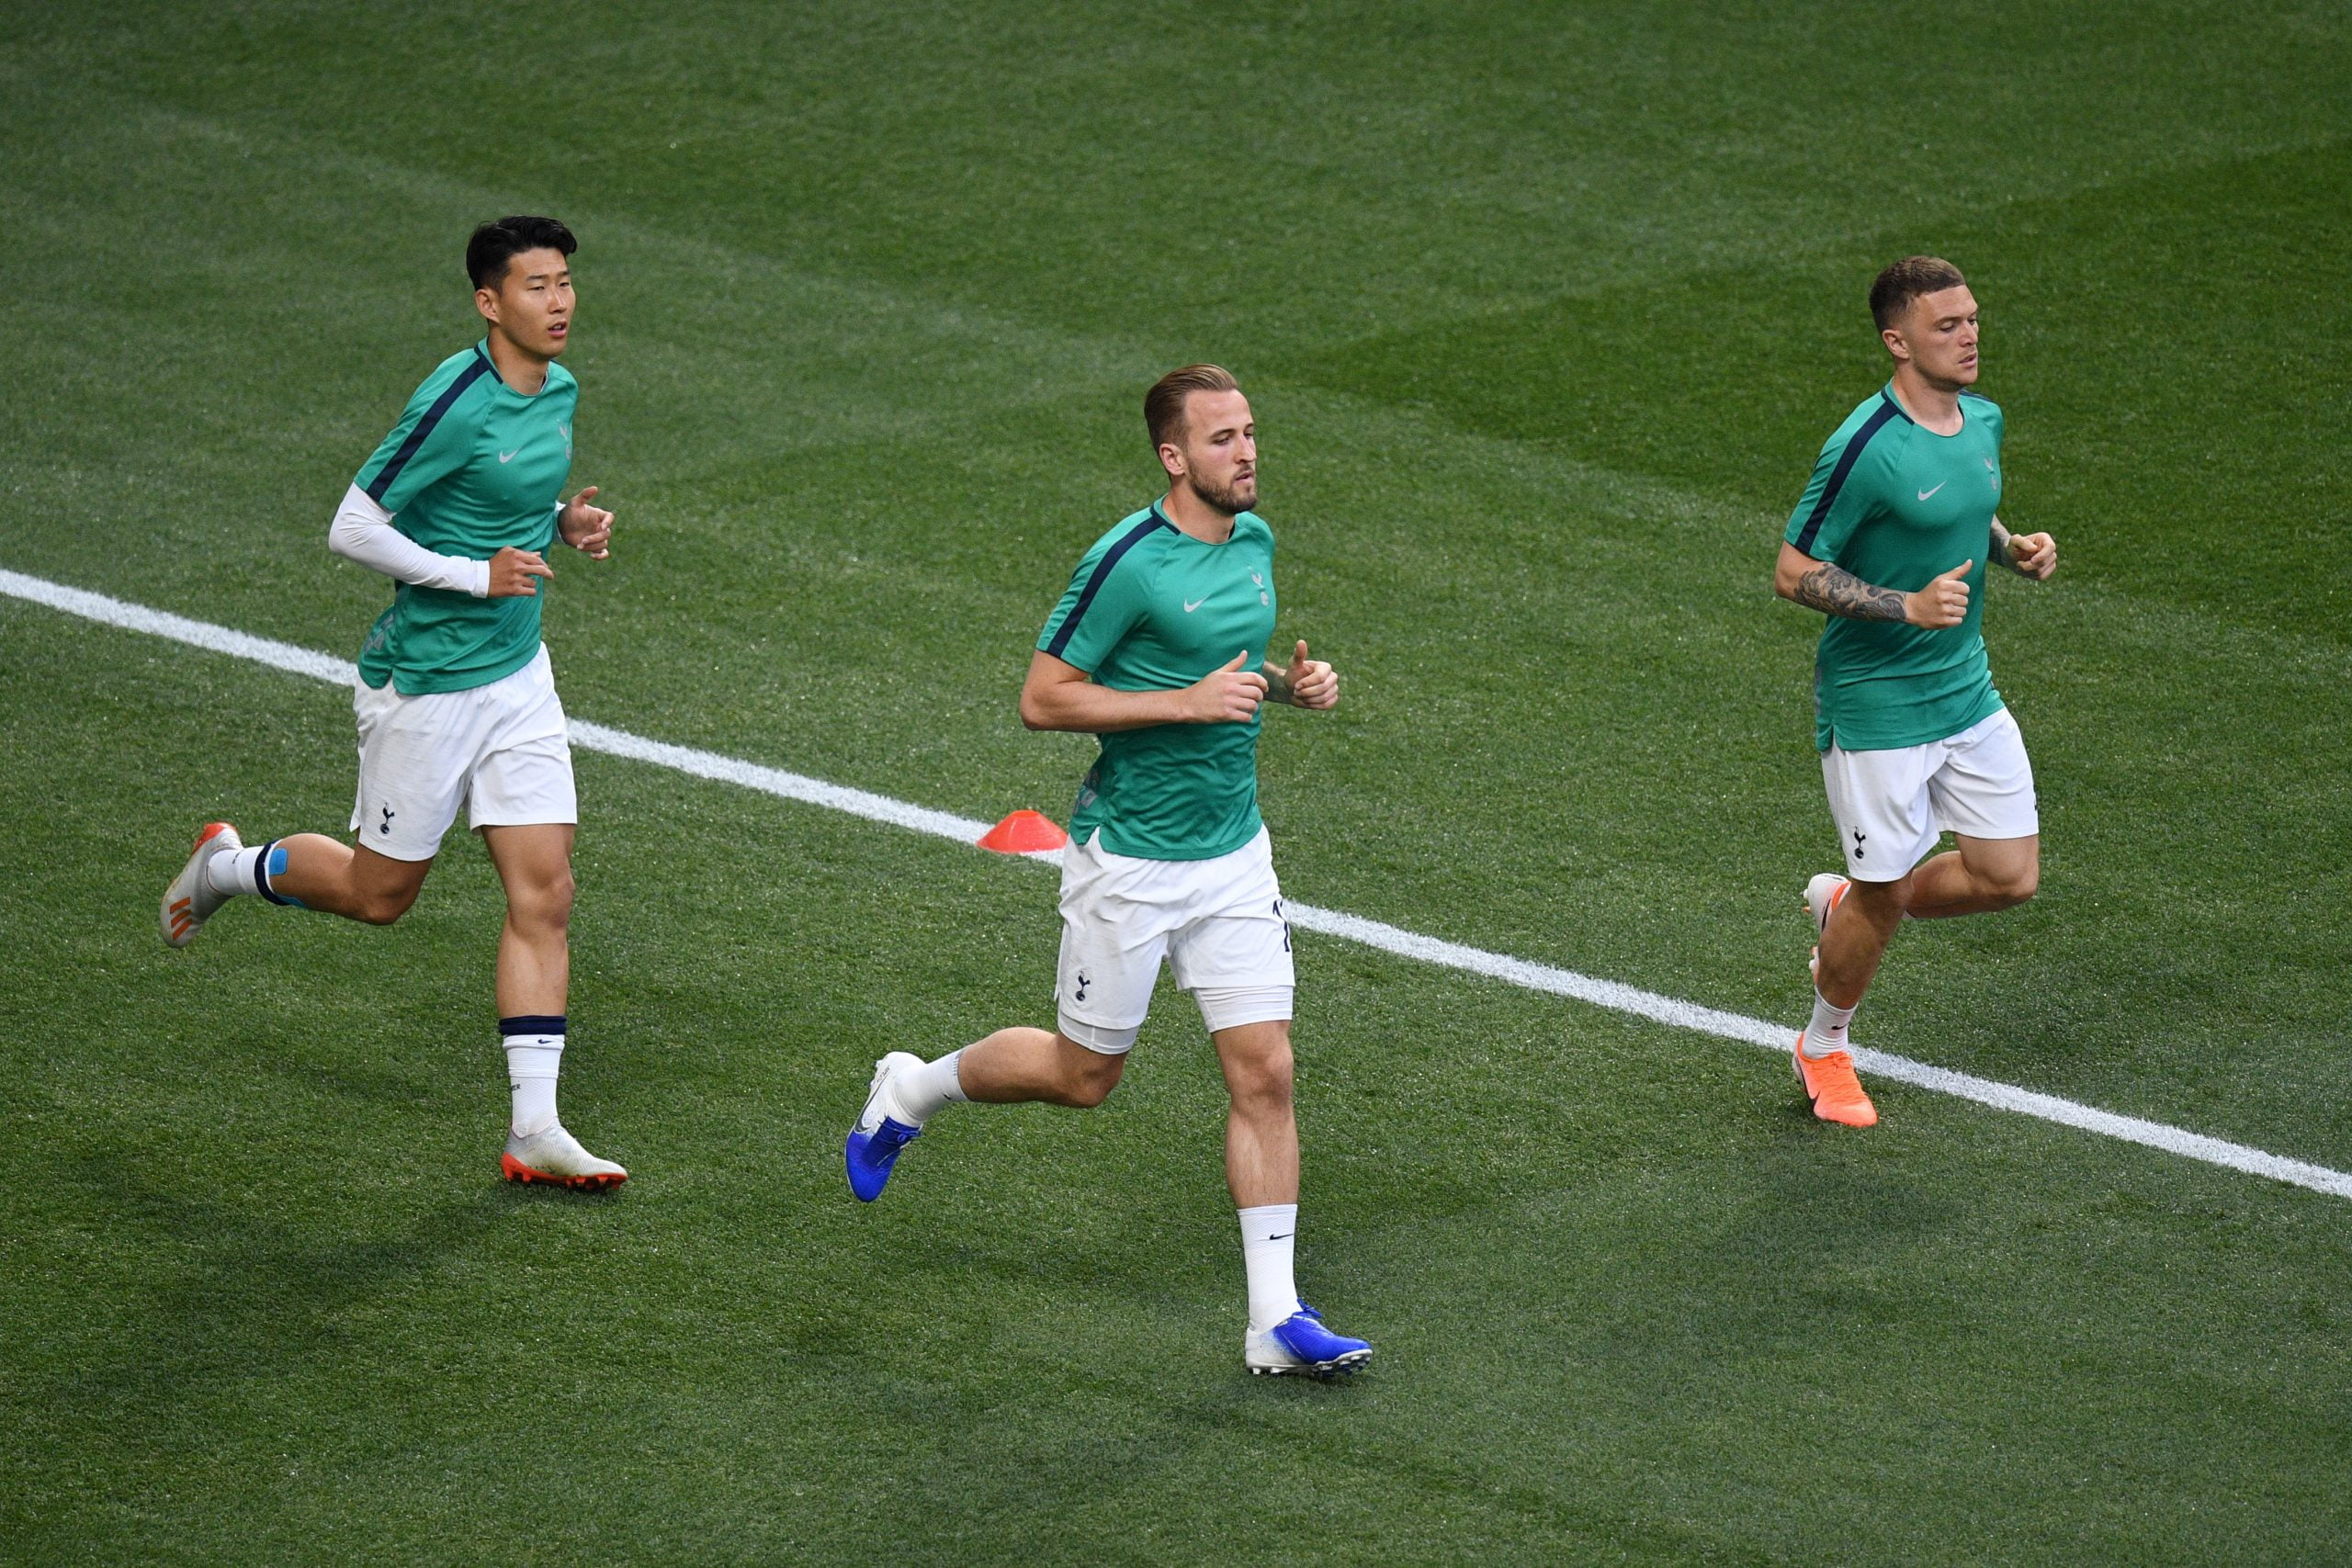 Harry Kane, Heung-Min Son and Kieran Trippier of Tottenham Hotspur warm up prior to the UEFA Champions League Final between Tottenham Hotspur and Liverpool at Estadio Wanda Metropolitano on June 01, 2019 in Madrid, Spain. (Photo by David Ramos/Getty Images)